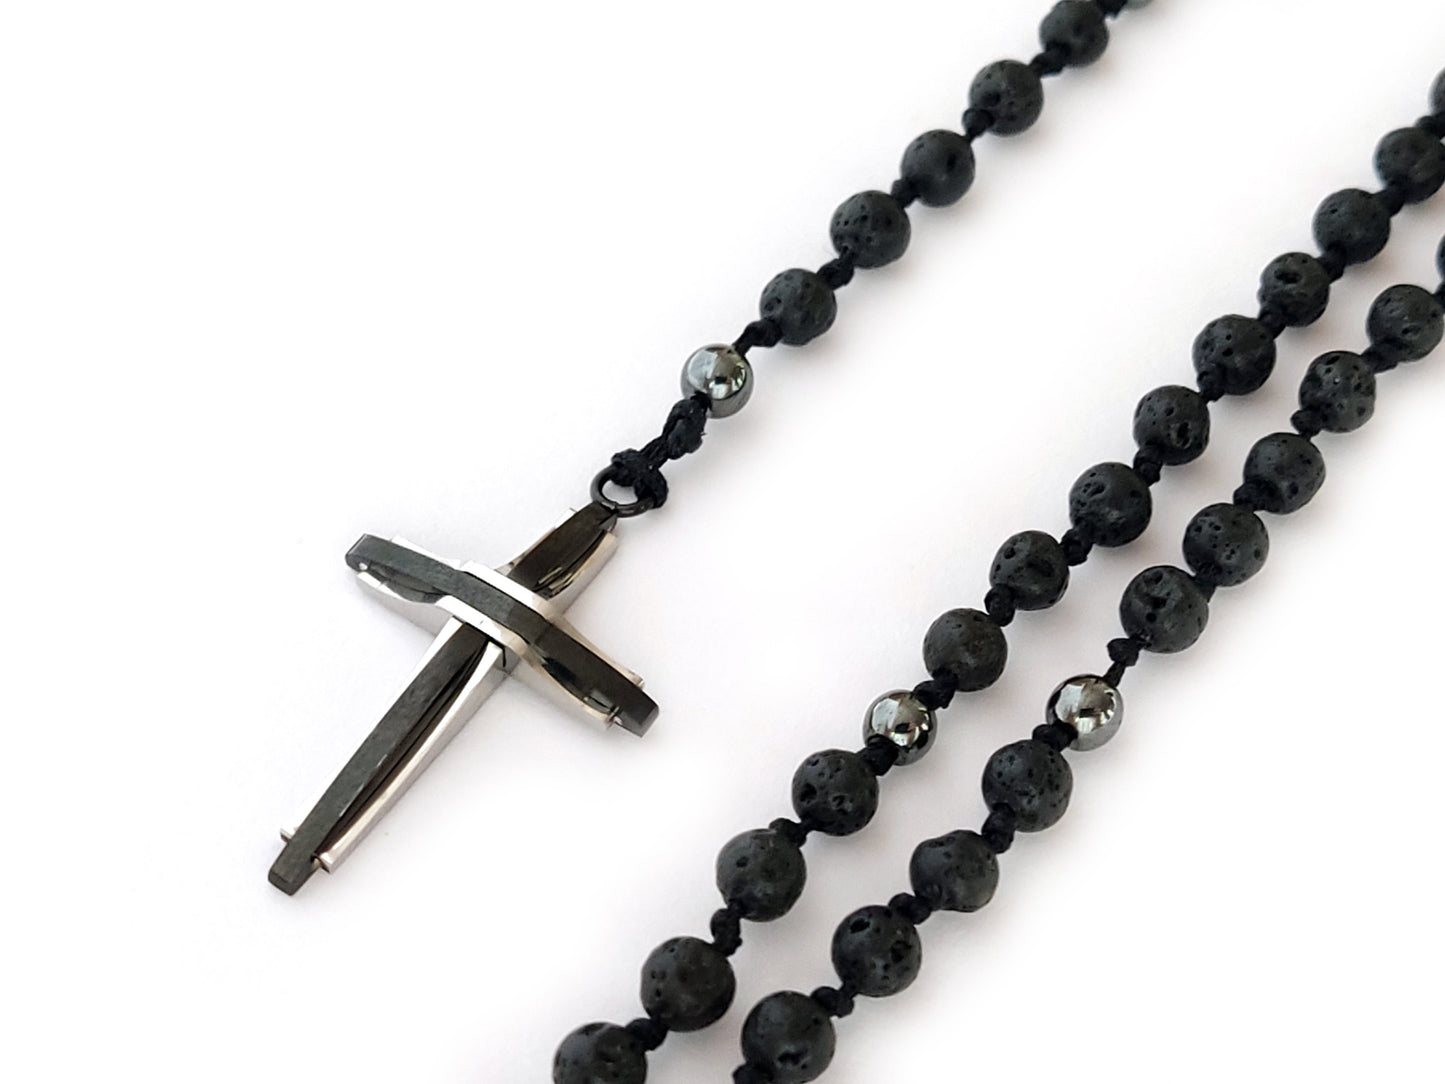 Handmade Rosary Necklace with Natural Black Lava and Hematite Stones | Stainless Steel Cross | Adjustable Length | Made in Greece